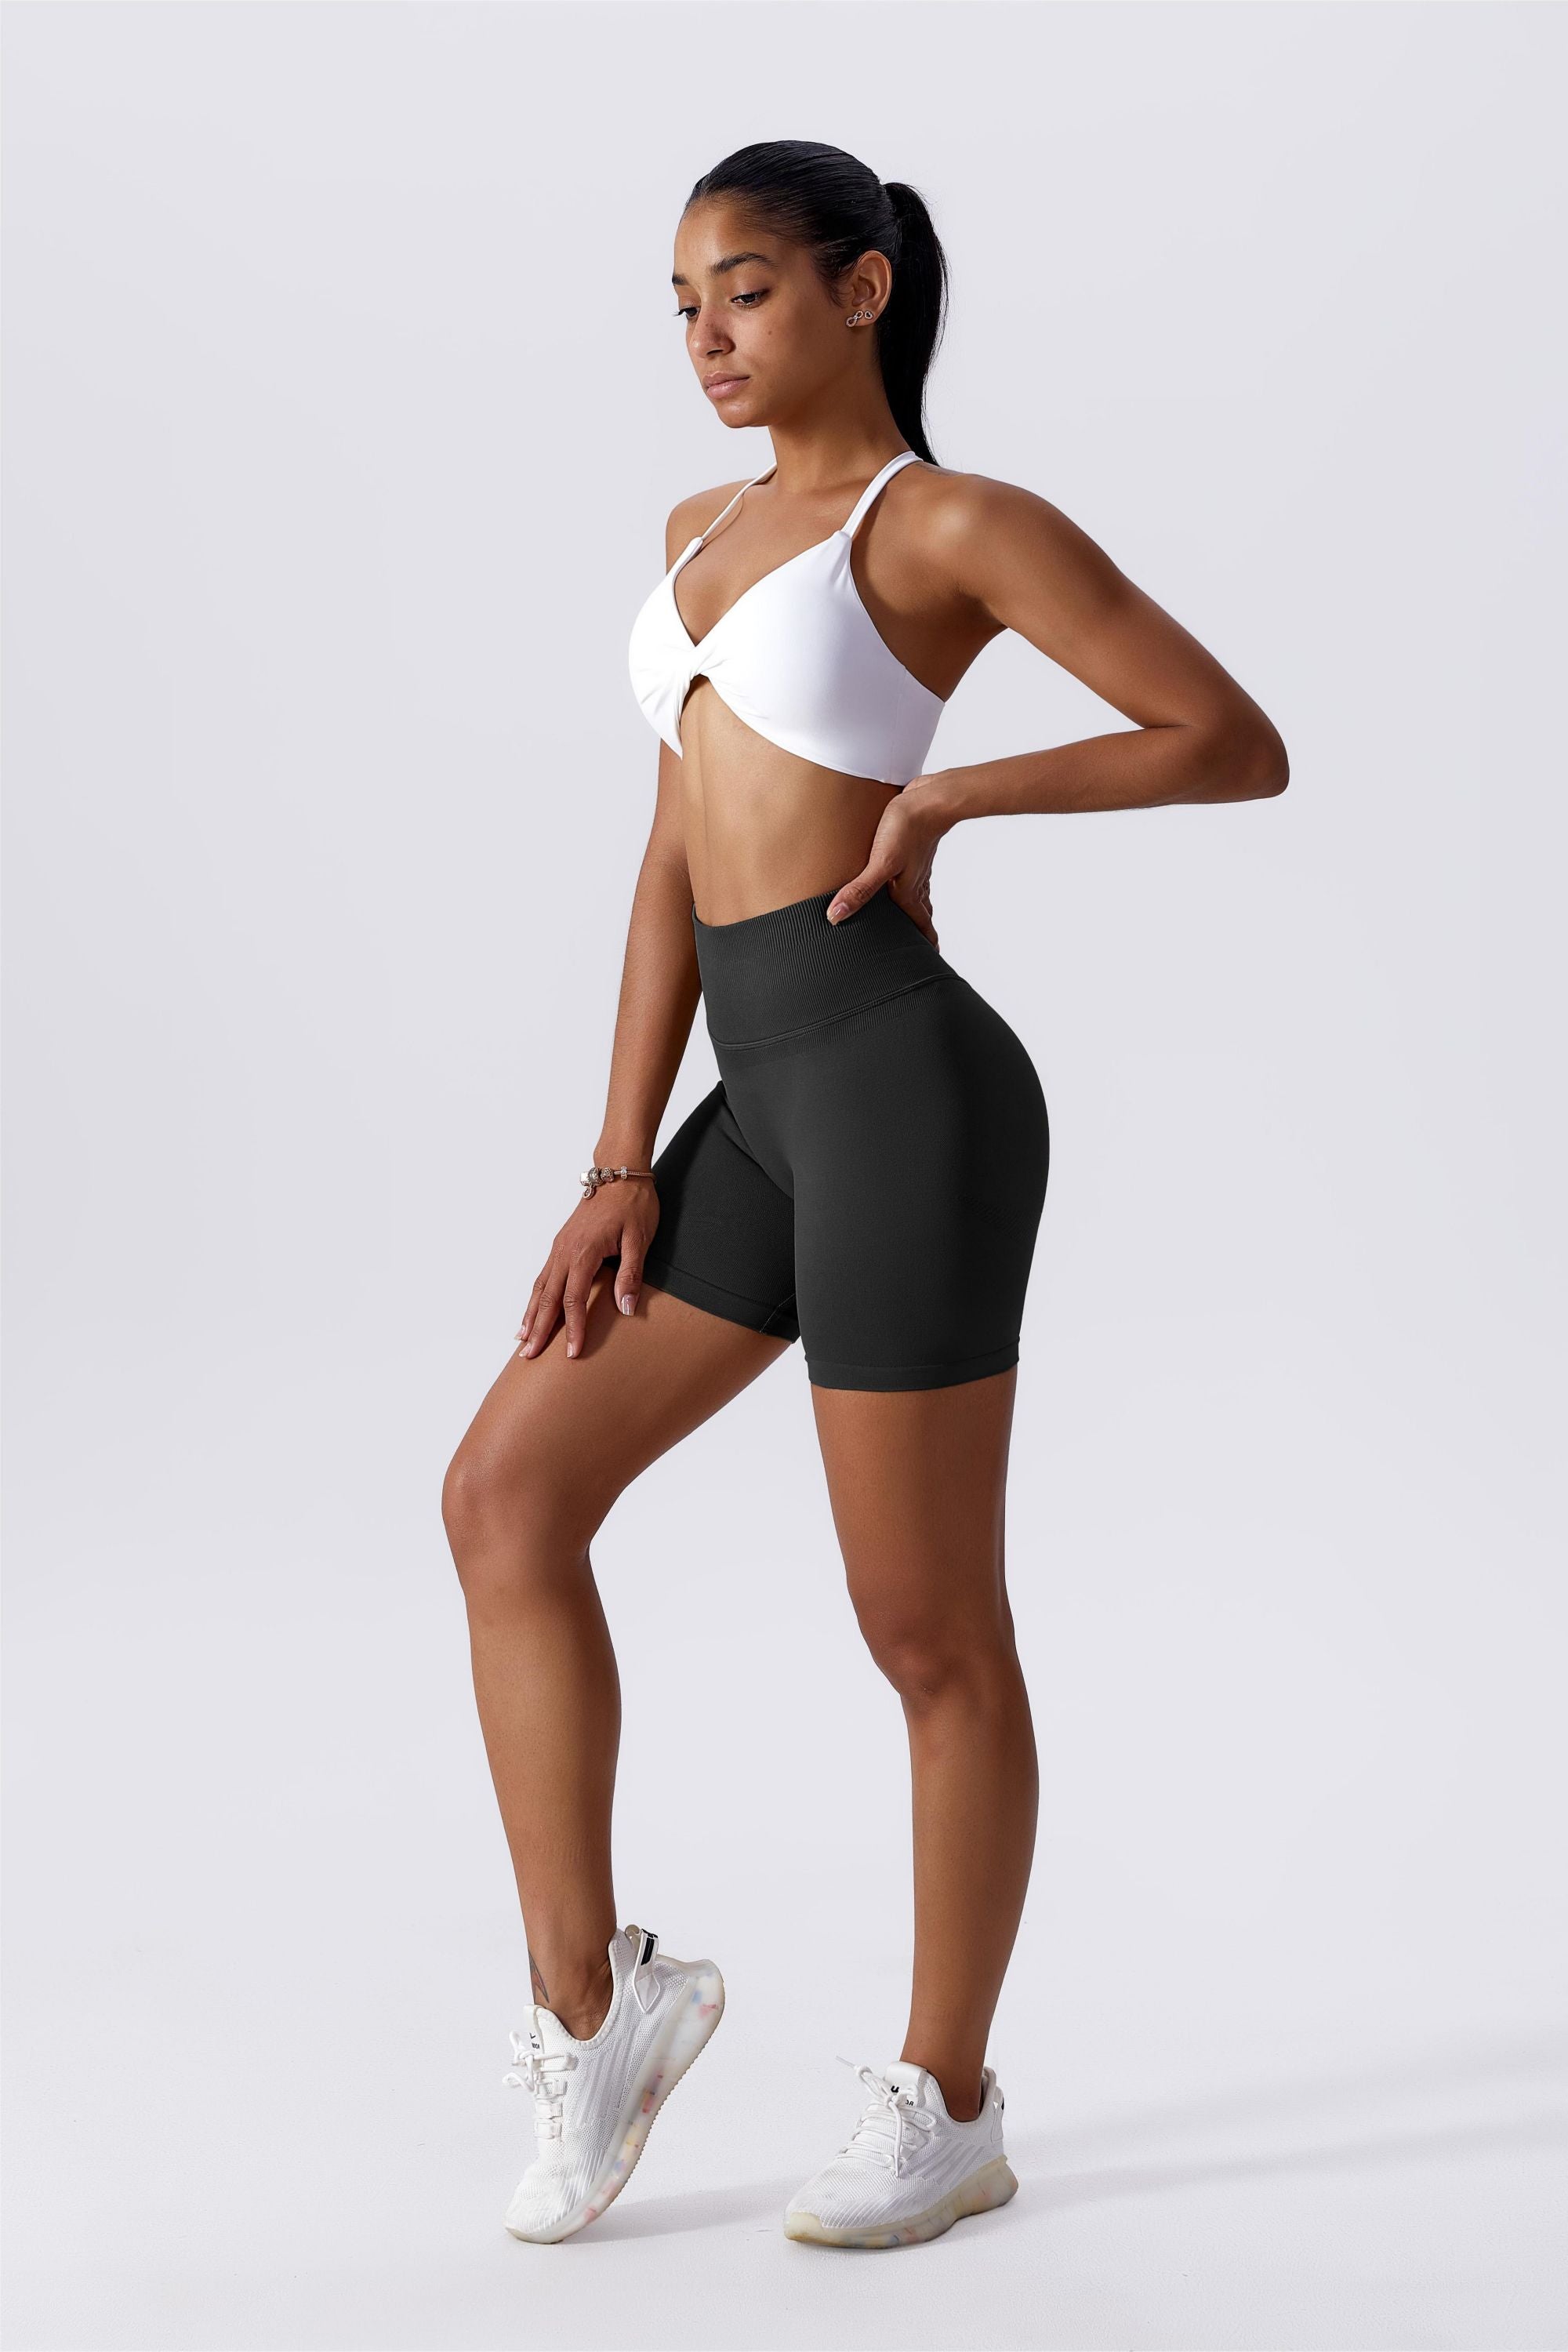 Extra Snatched Booty Shorts – Waistless Summer